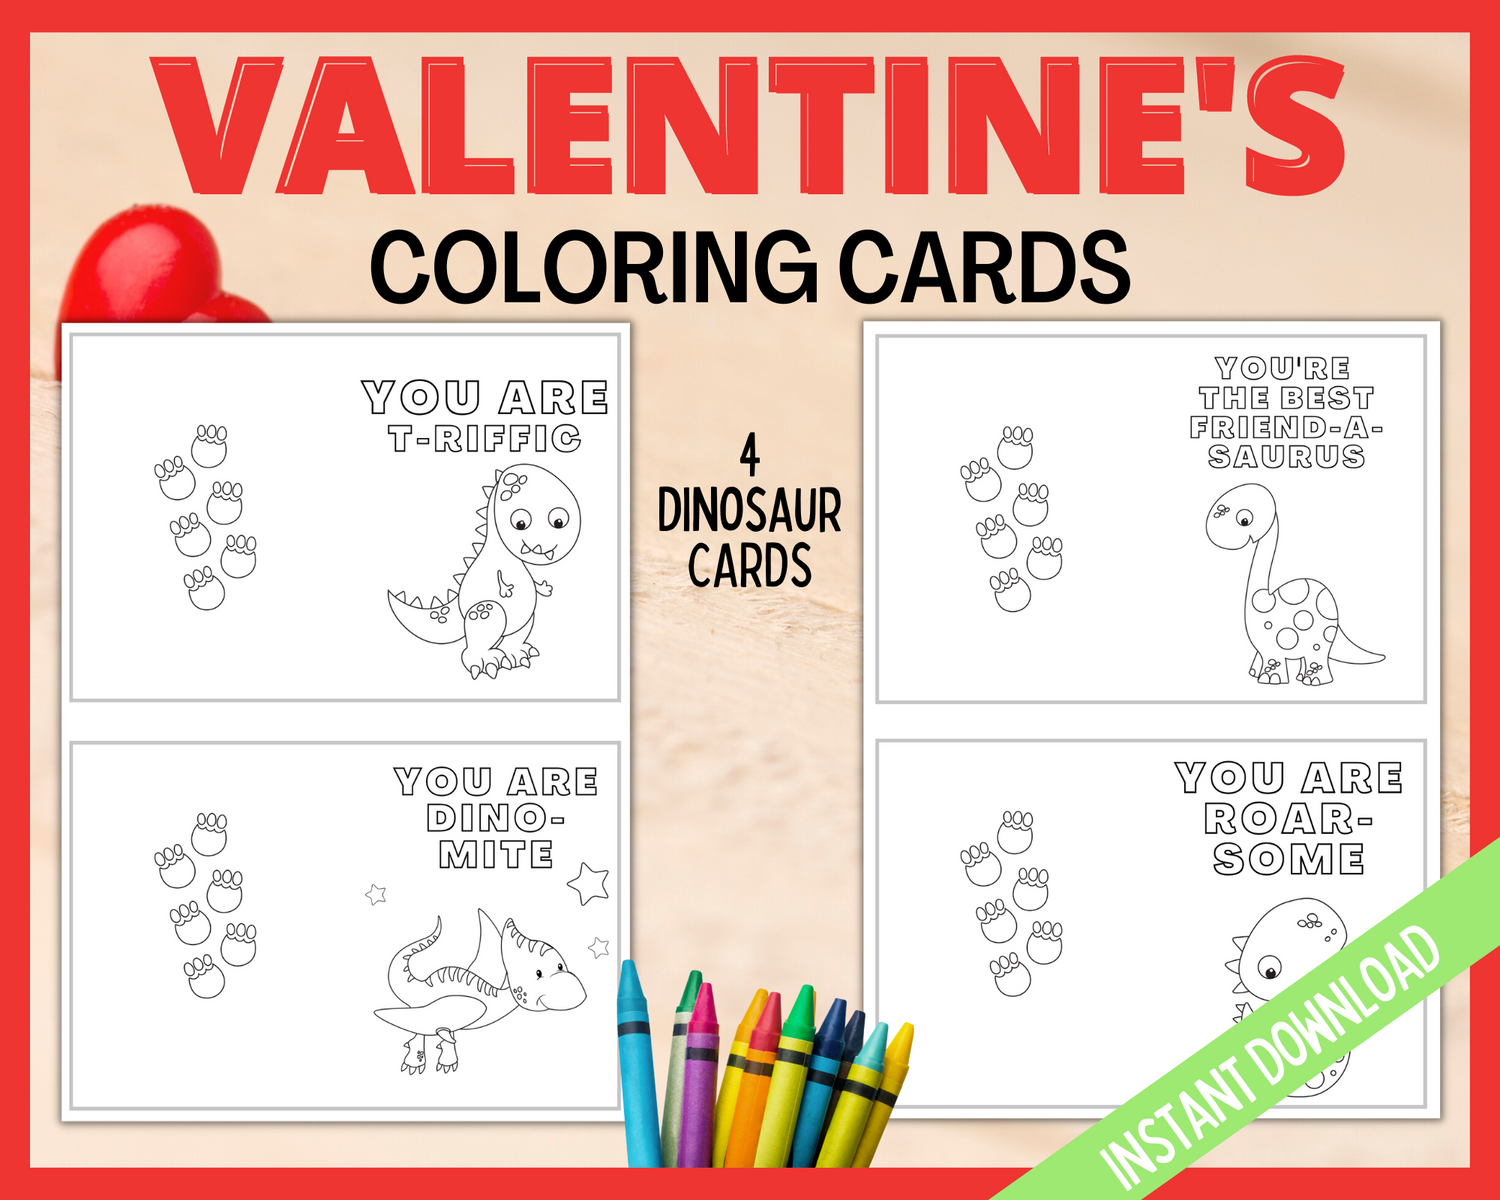 Dinosaur valentines coloring cards